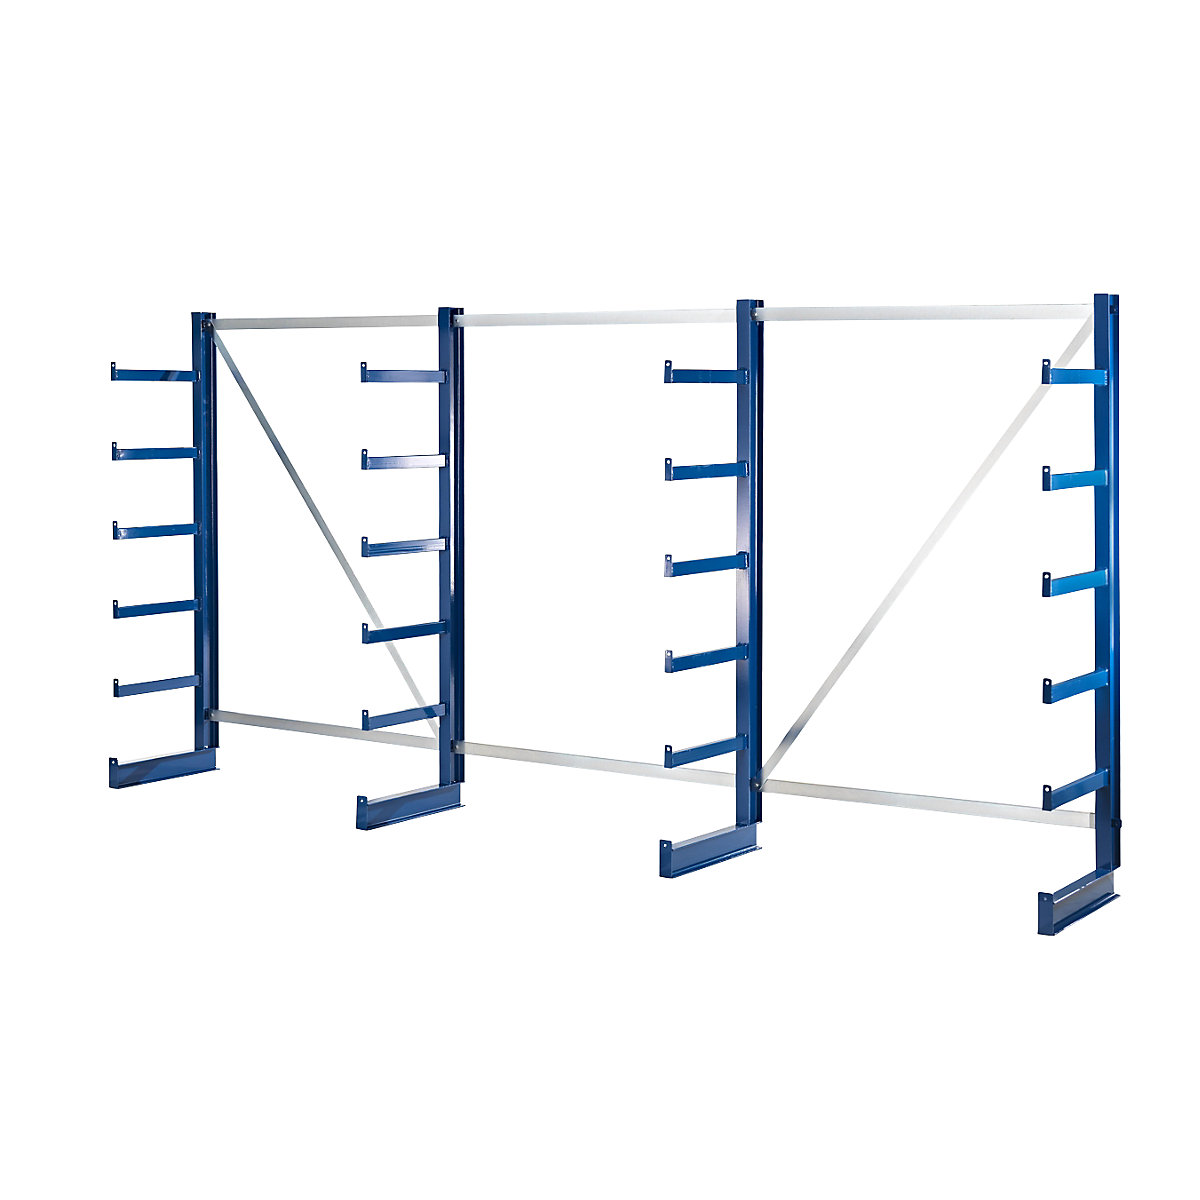 Cantilever racking unit with identical cantilever arm length - eurokraft pro